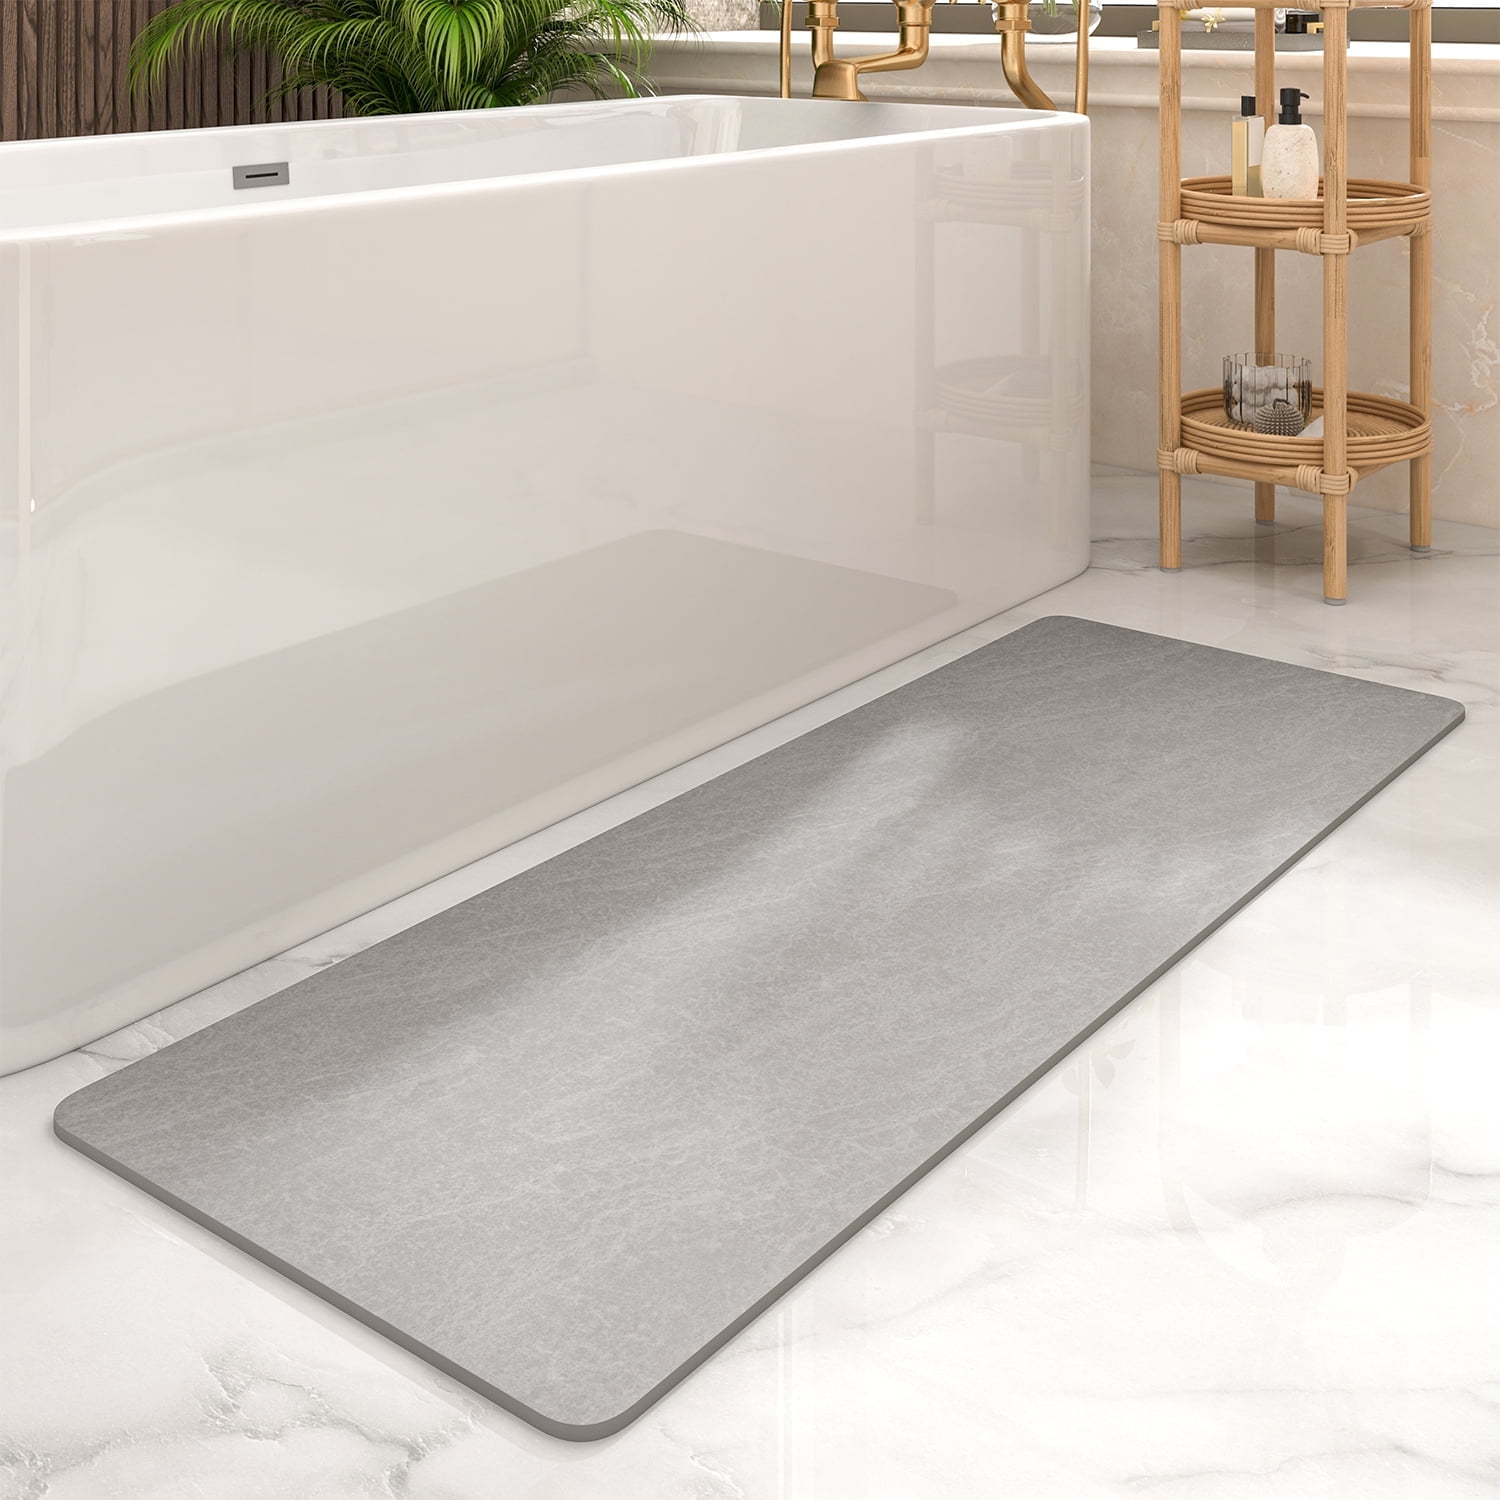  SIXHOME-Bath Rug-Quick Dry Absorbent Rubber Backed Thin Bathroom  Rugs Fit Under Door-Bath Mats for Bathroom Floor Mat in Front of Sink-Shower  Rug 17X27.5 : Home & Kitchen